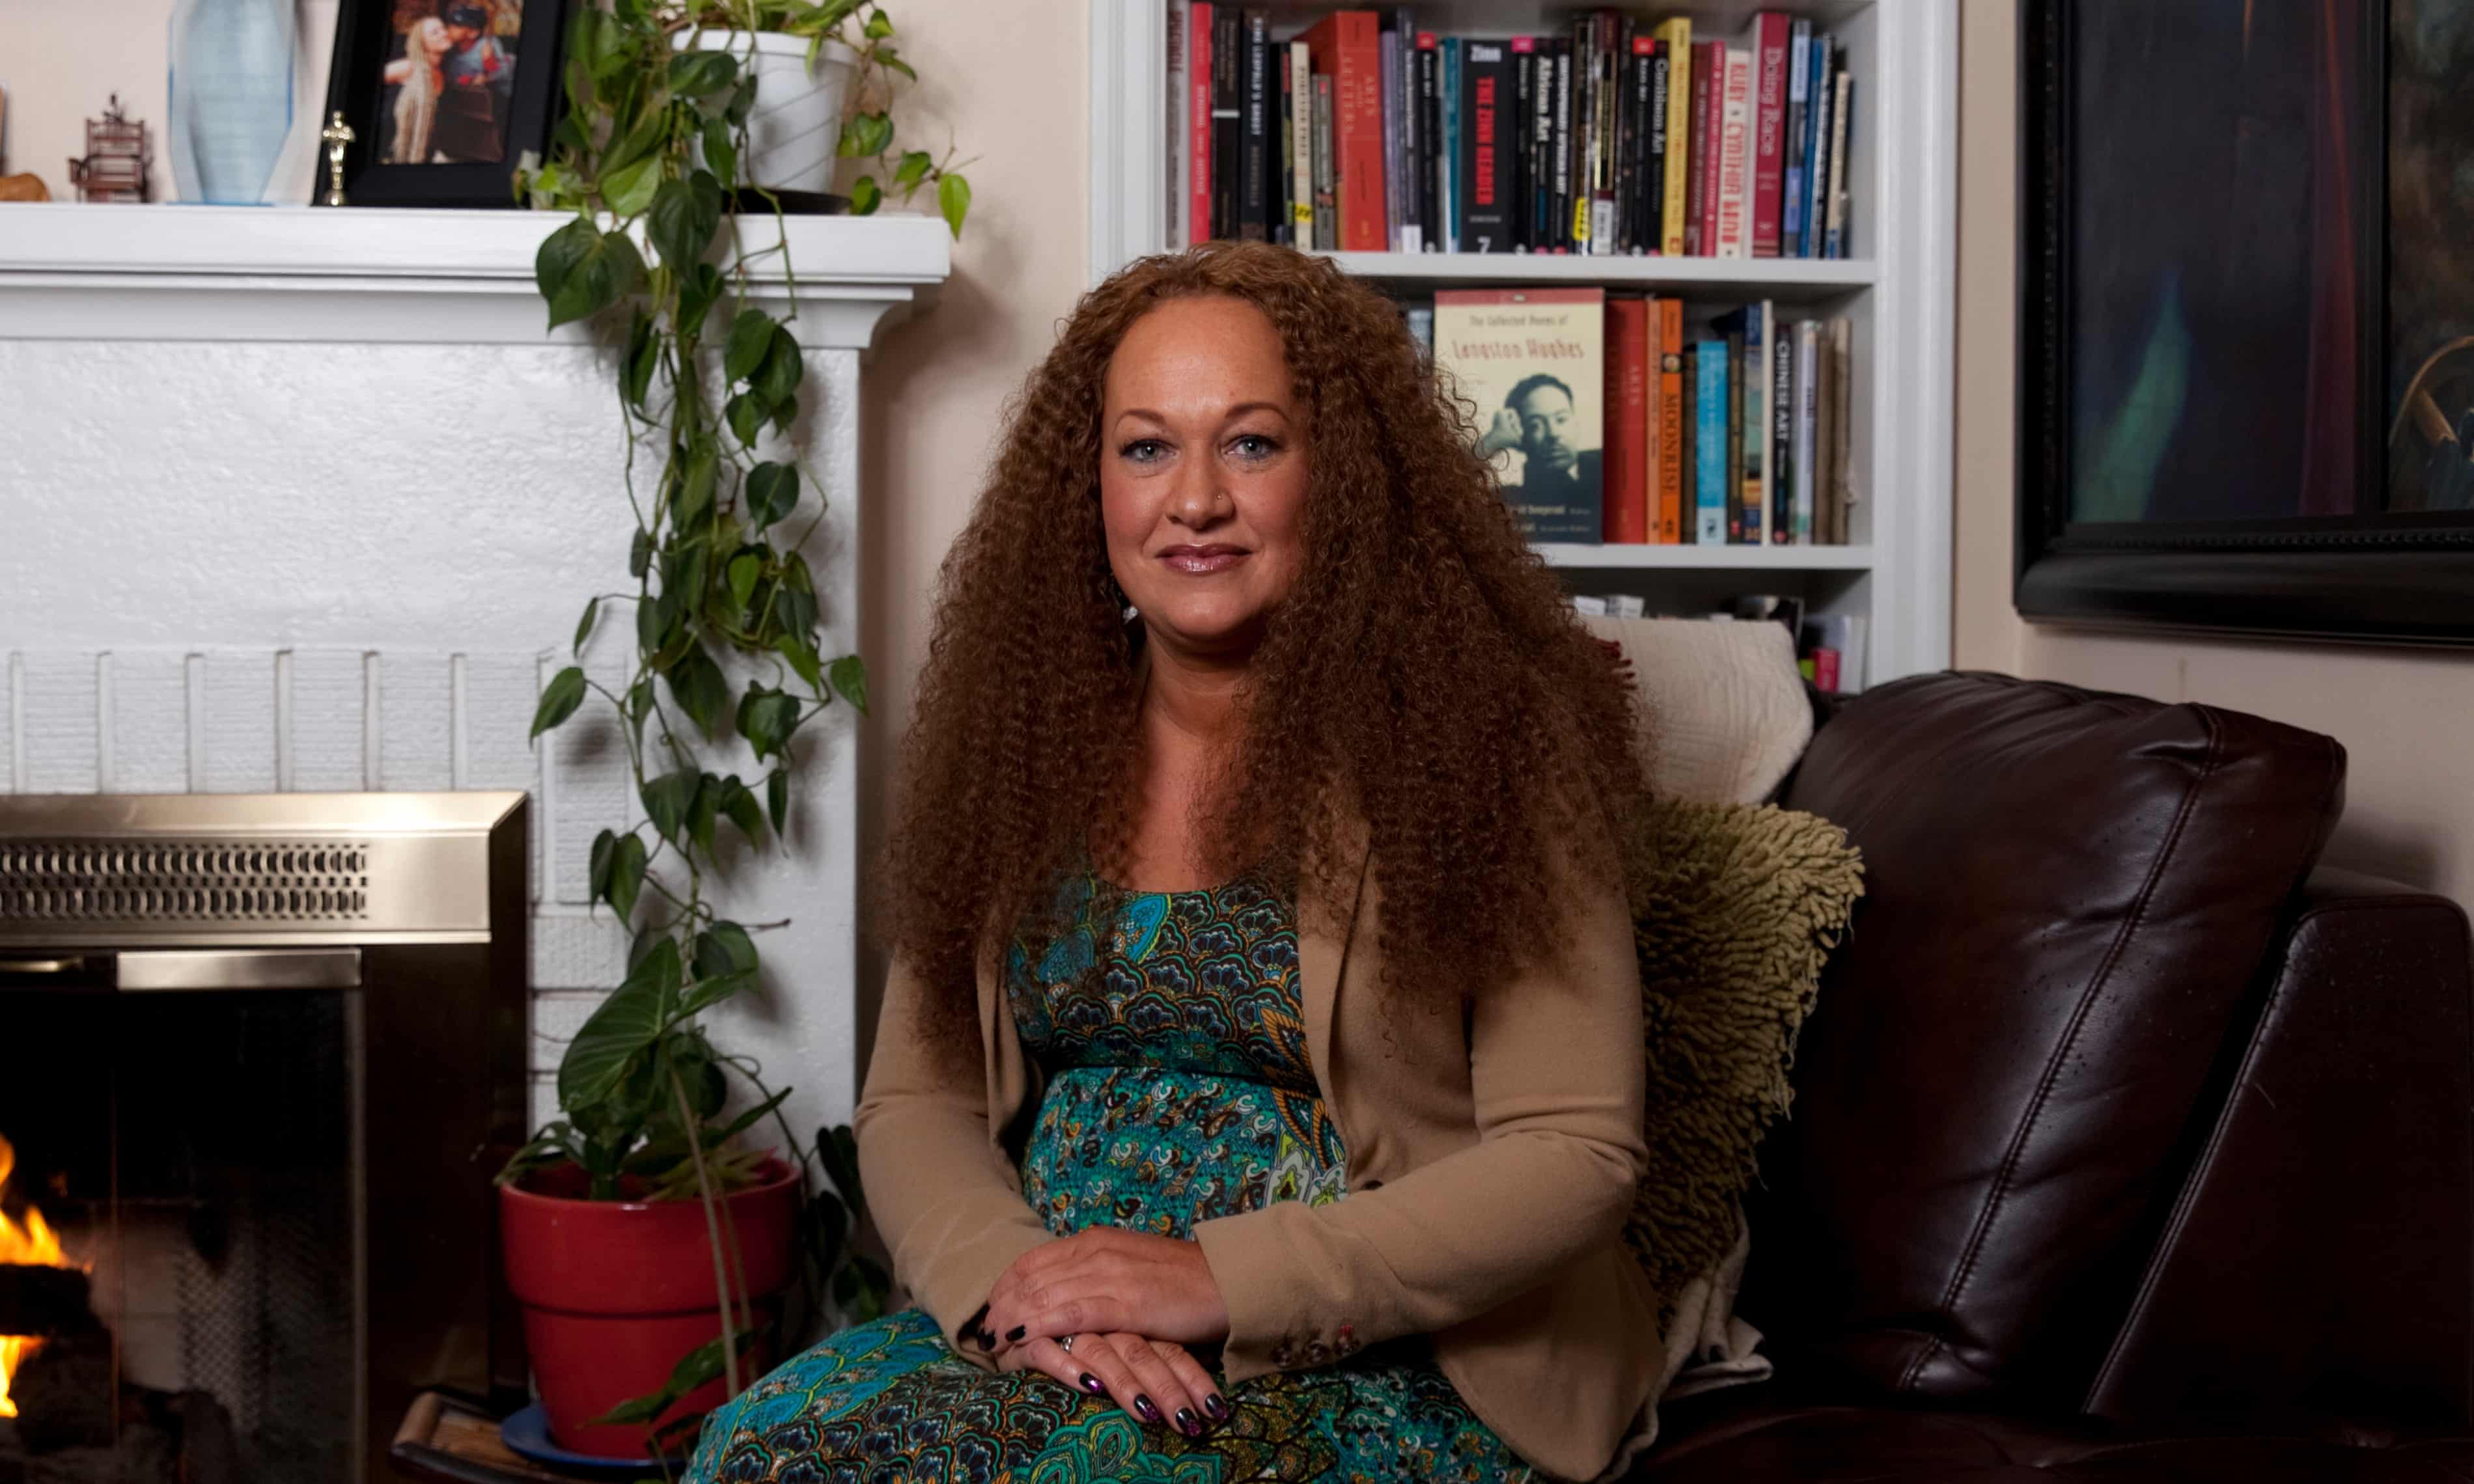 Teacher formerly known as Rachel Dolezal loses job over OnlyFans account (theguardian.com)